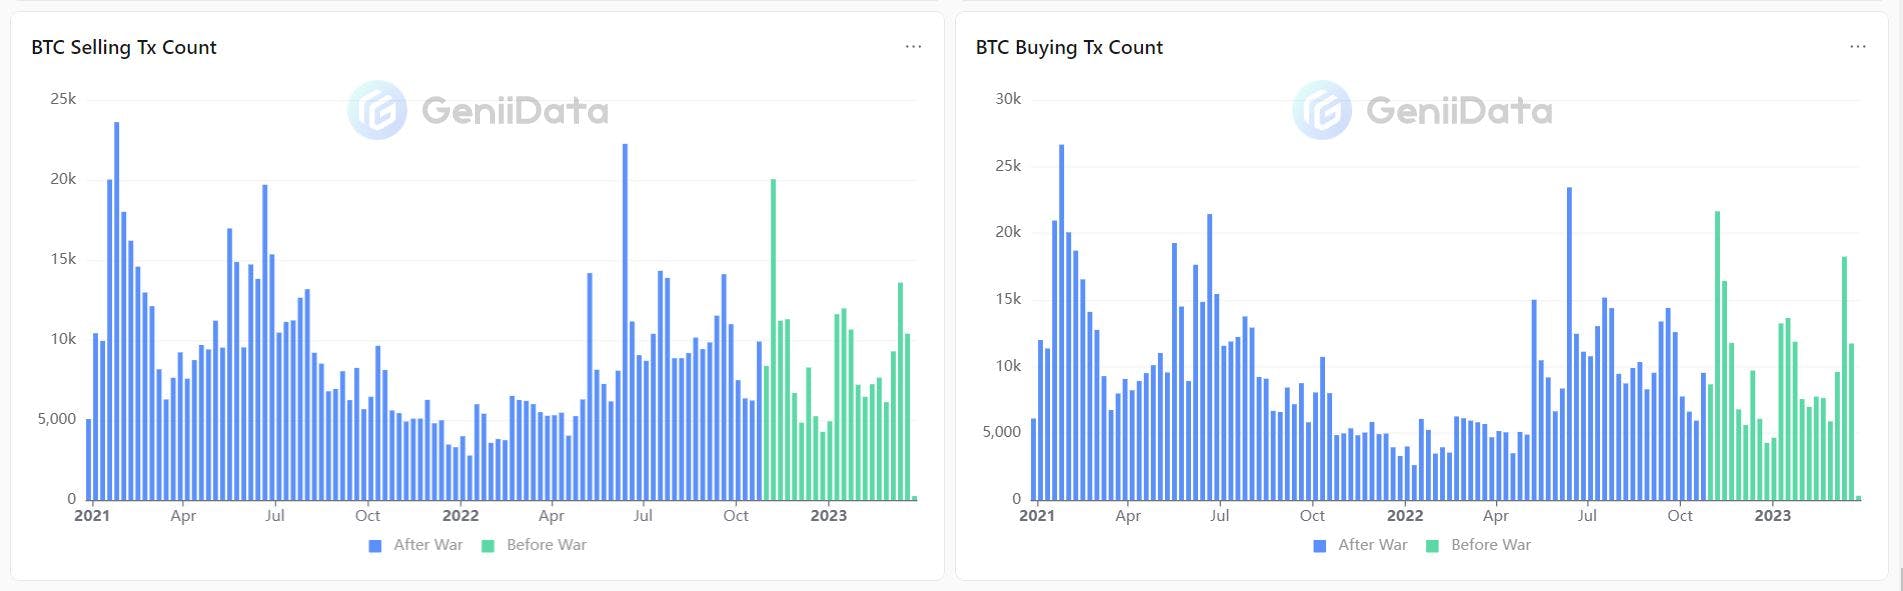 Selling vs. Buying Transactions Count